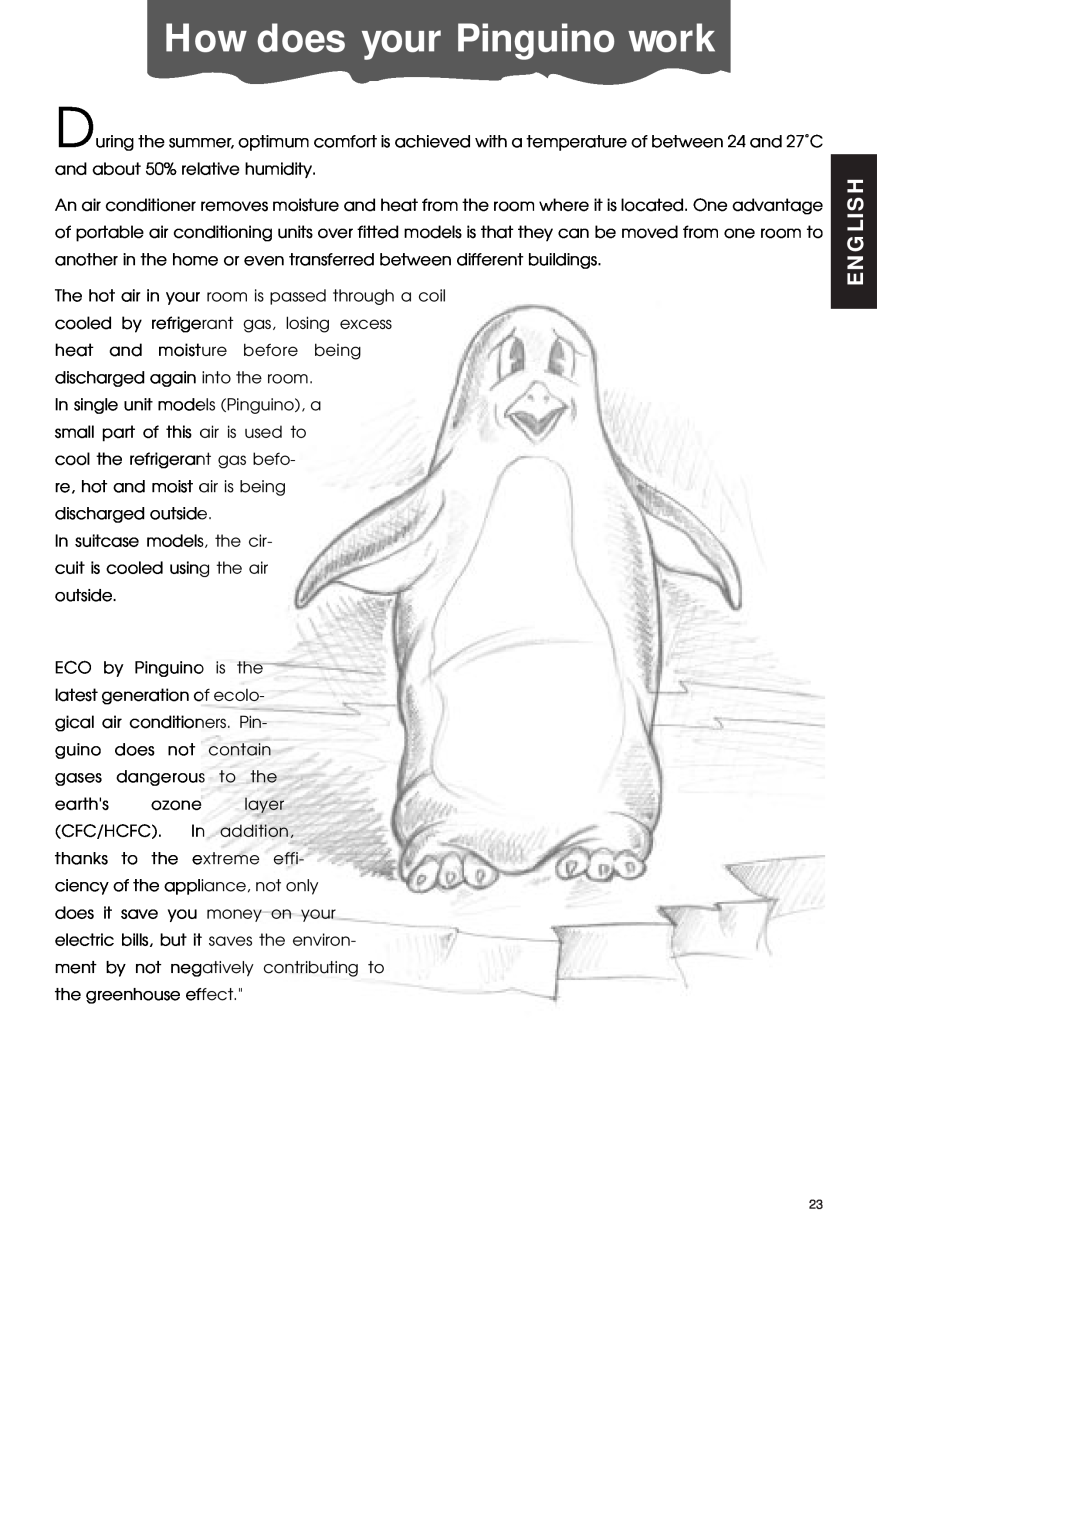 DeLonghi PAC70 ECO manual How does your Pinguino work, English 